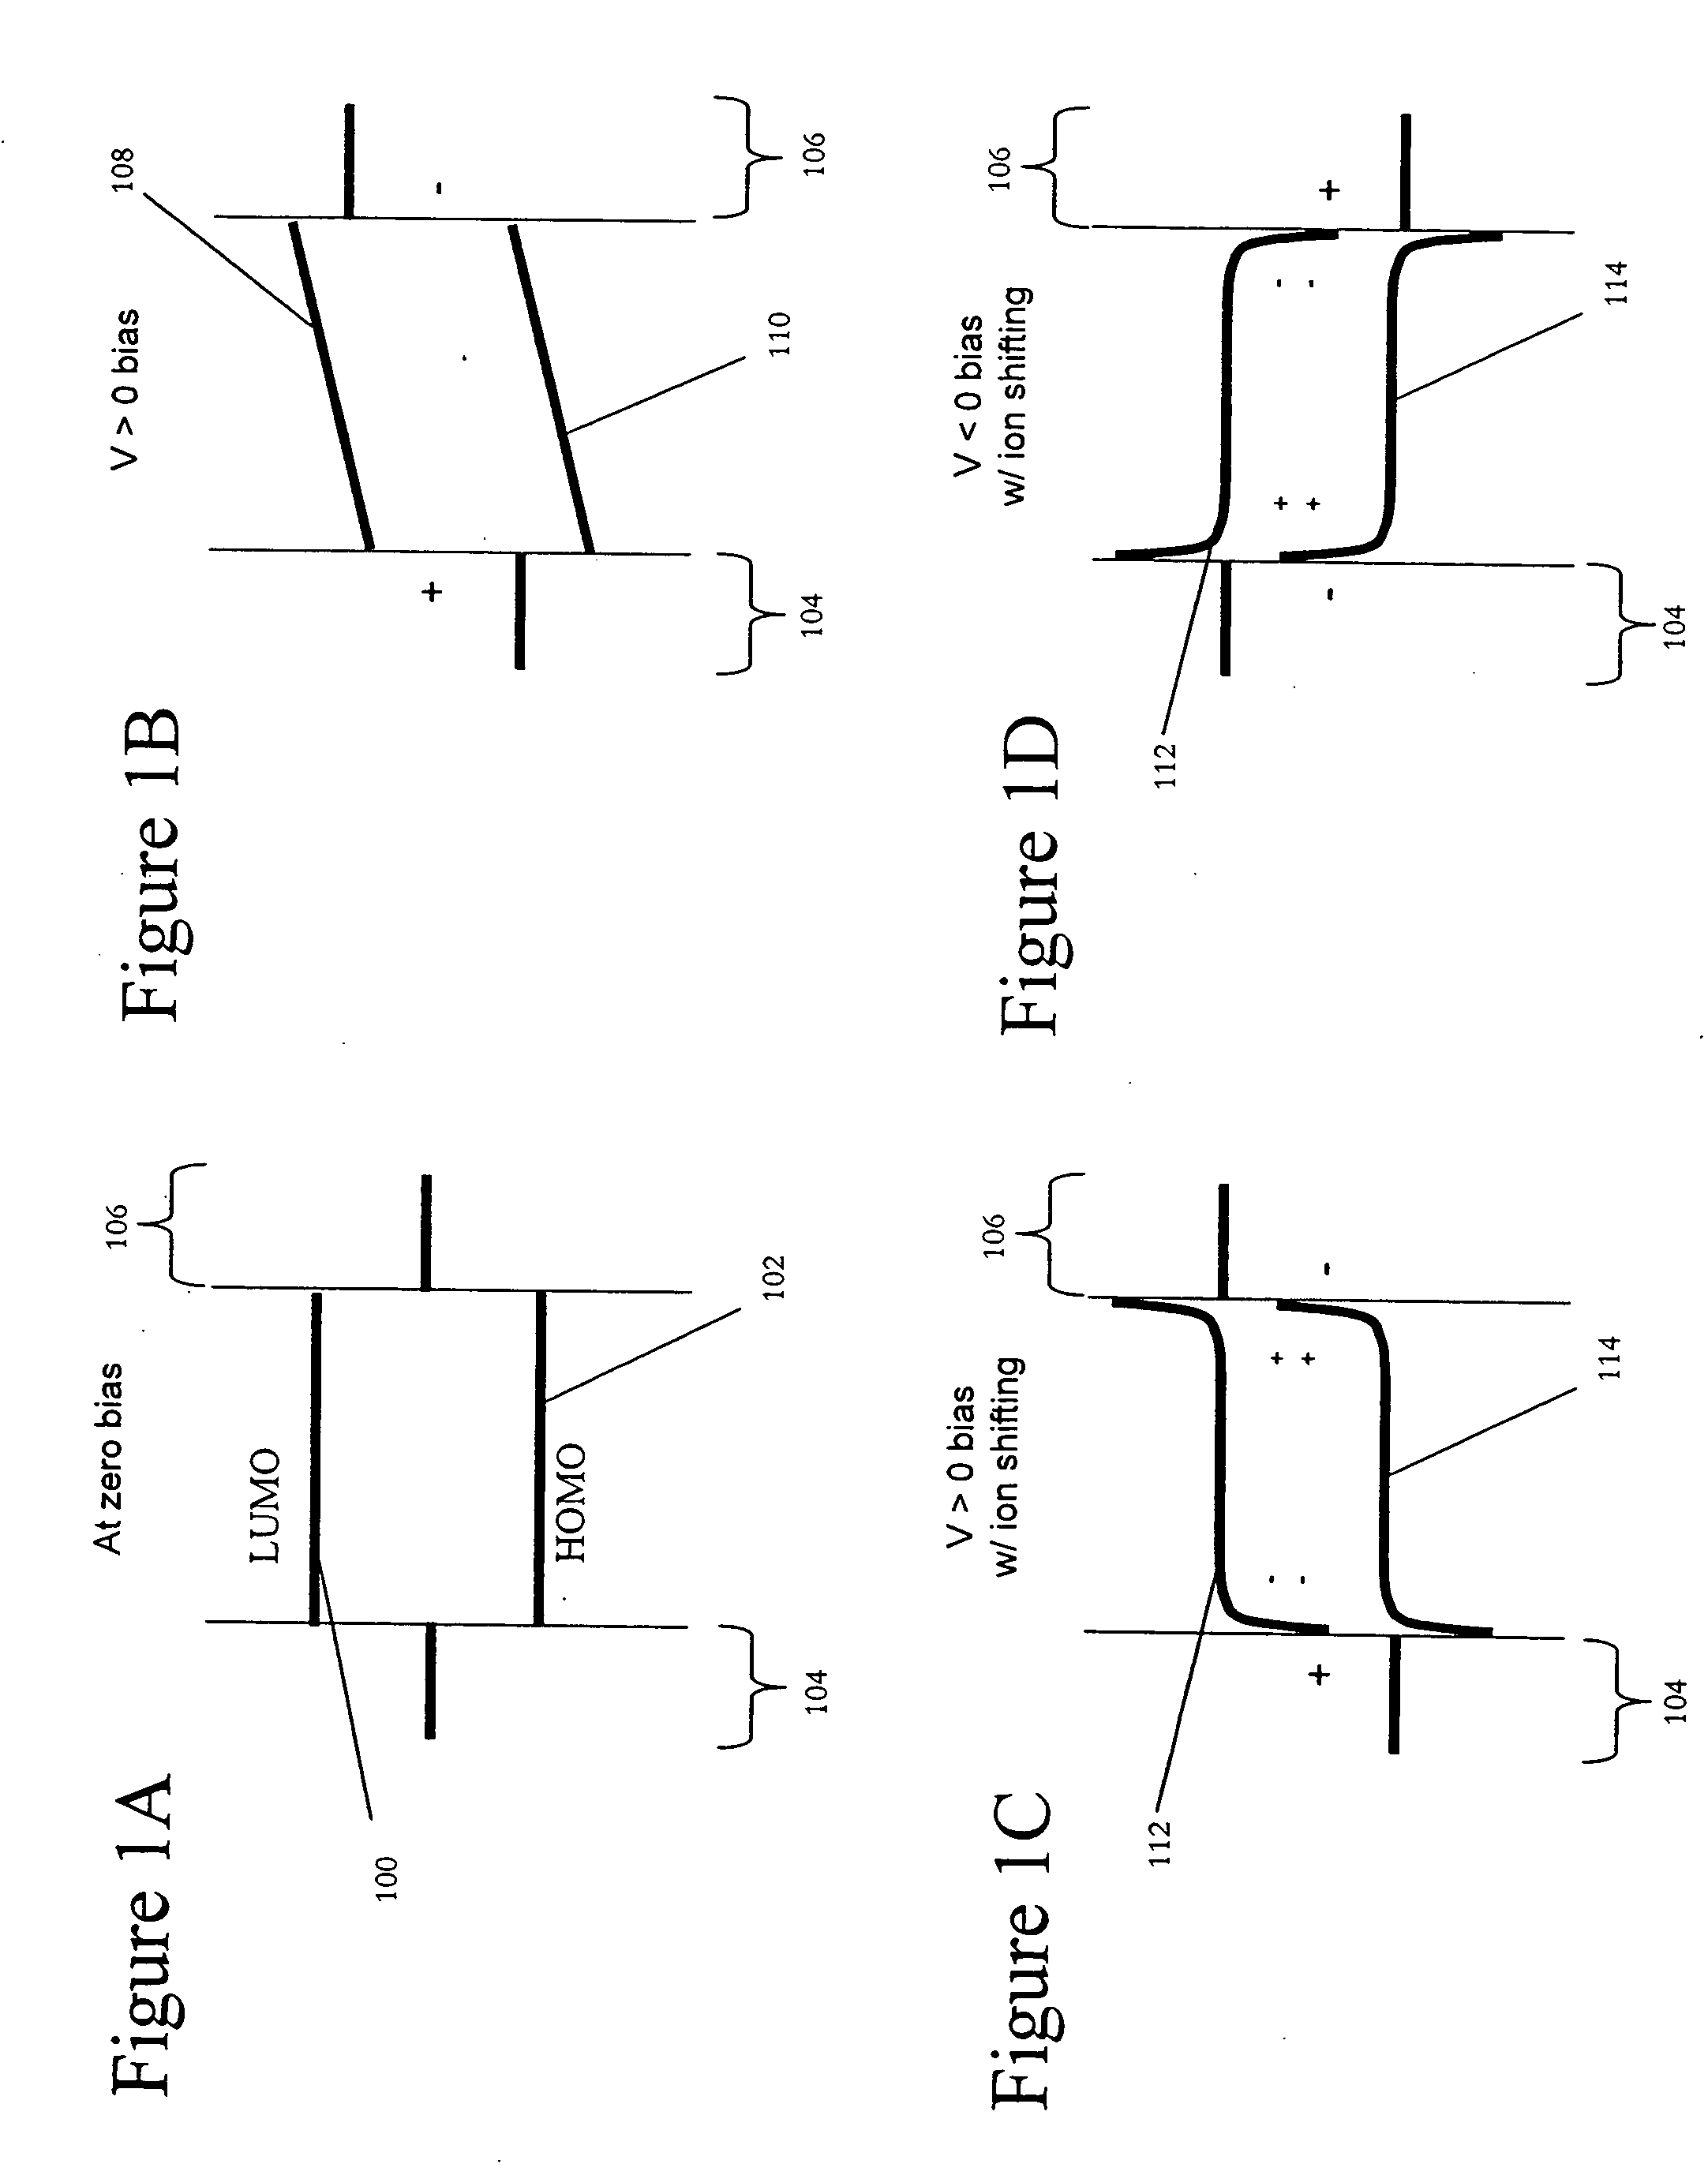 Cascaded light emitting devices based on mixed conductor electroluminescence